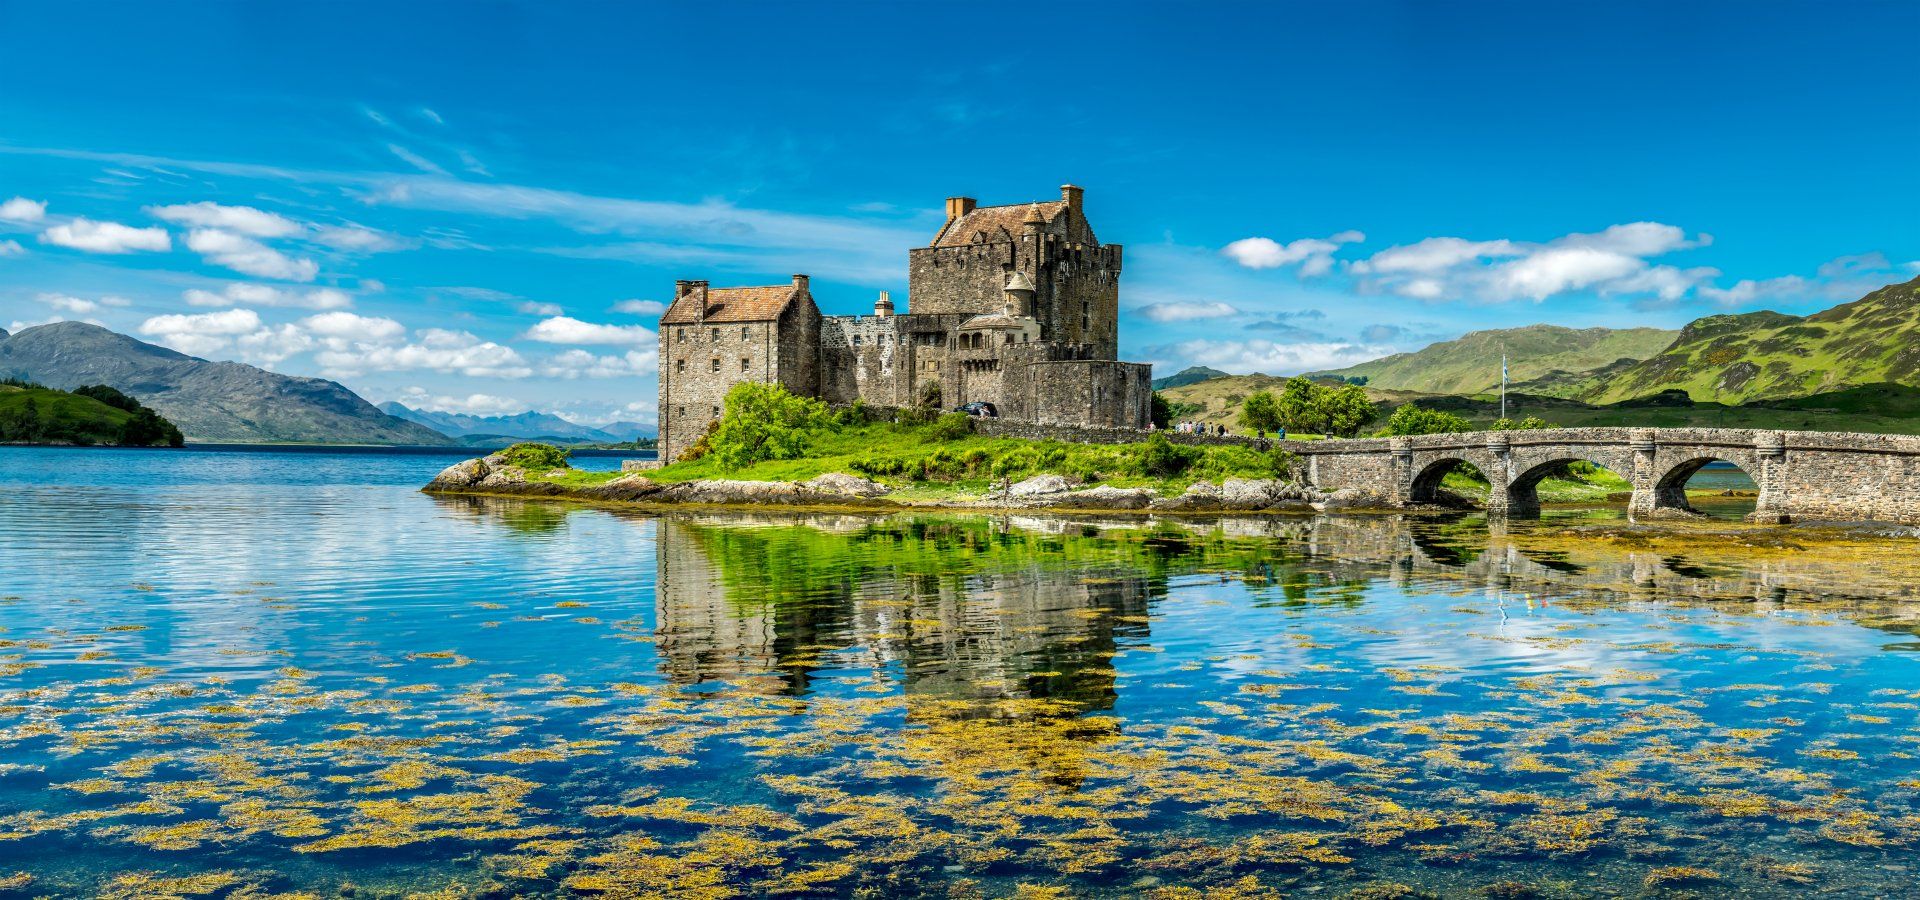 scotland and wales tours